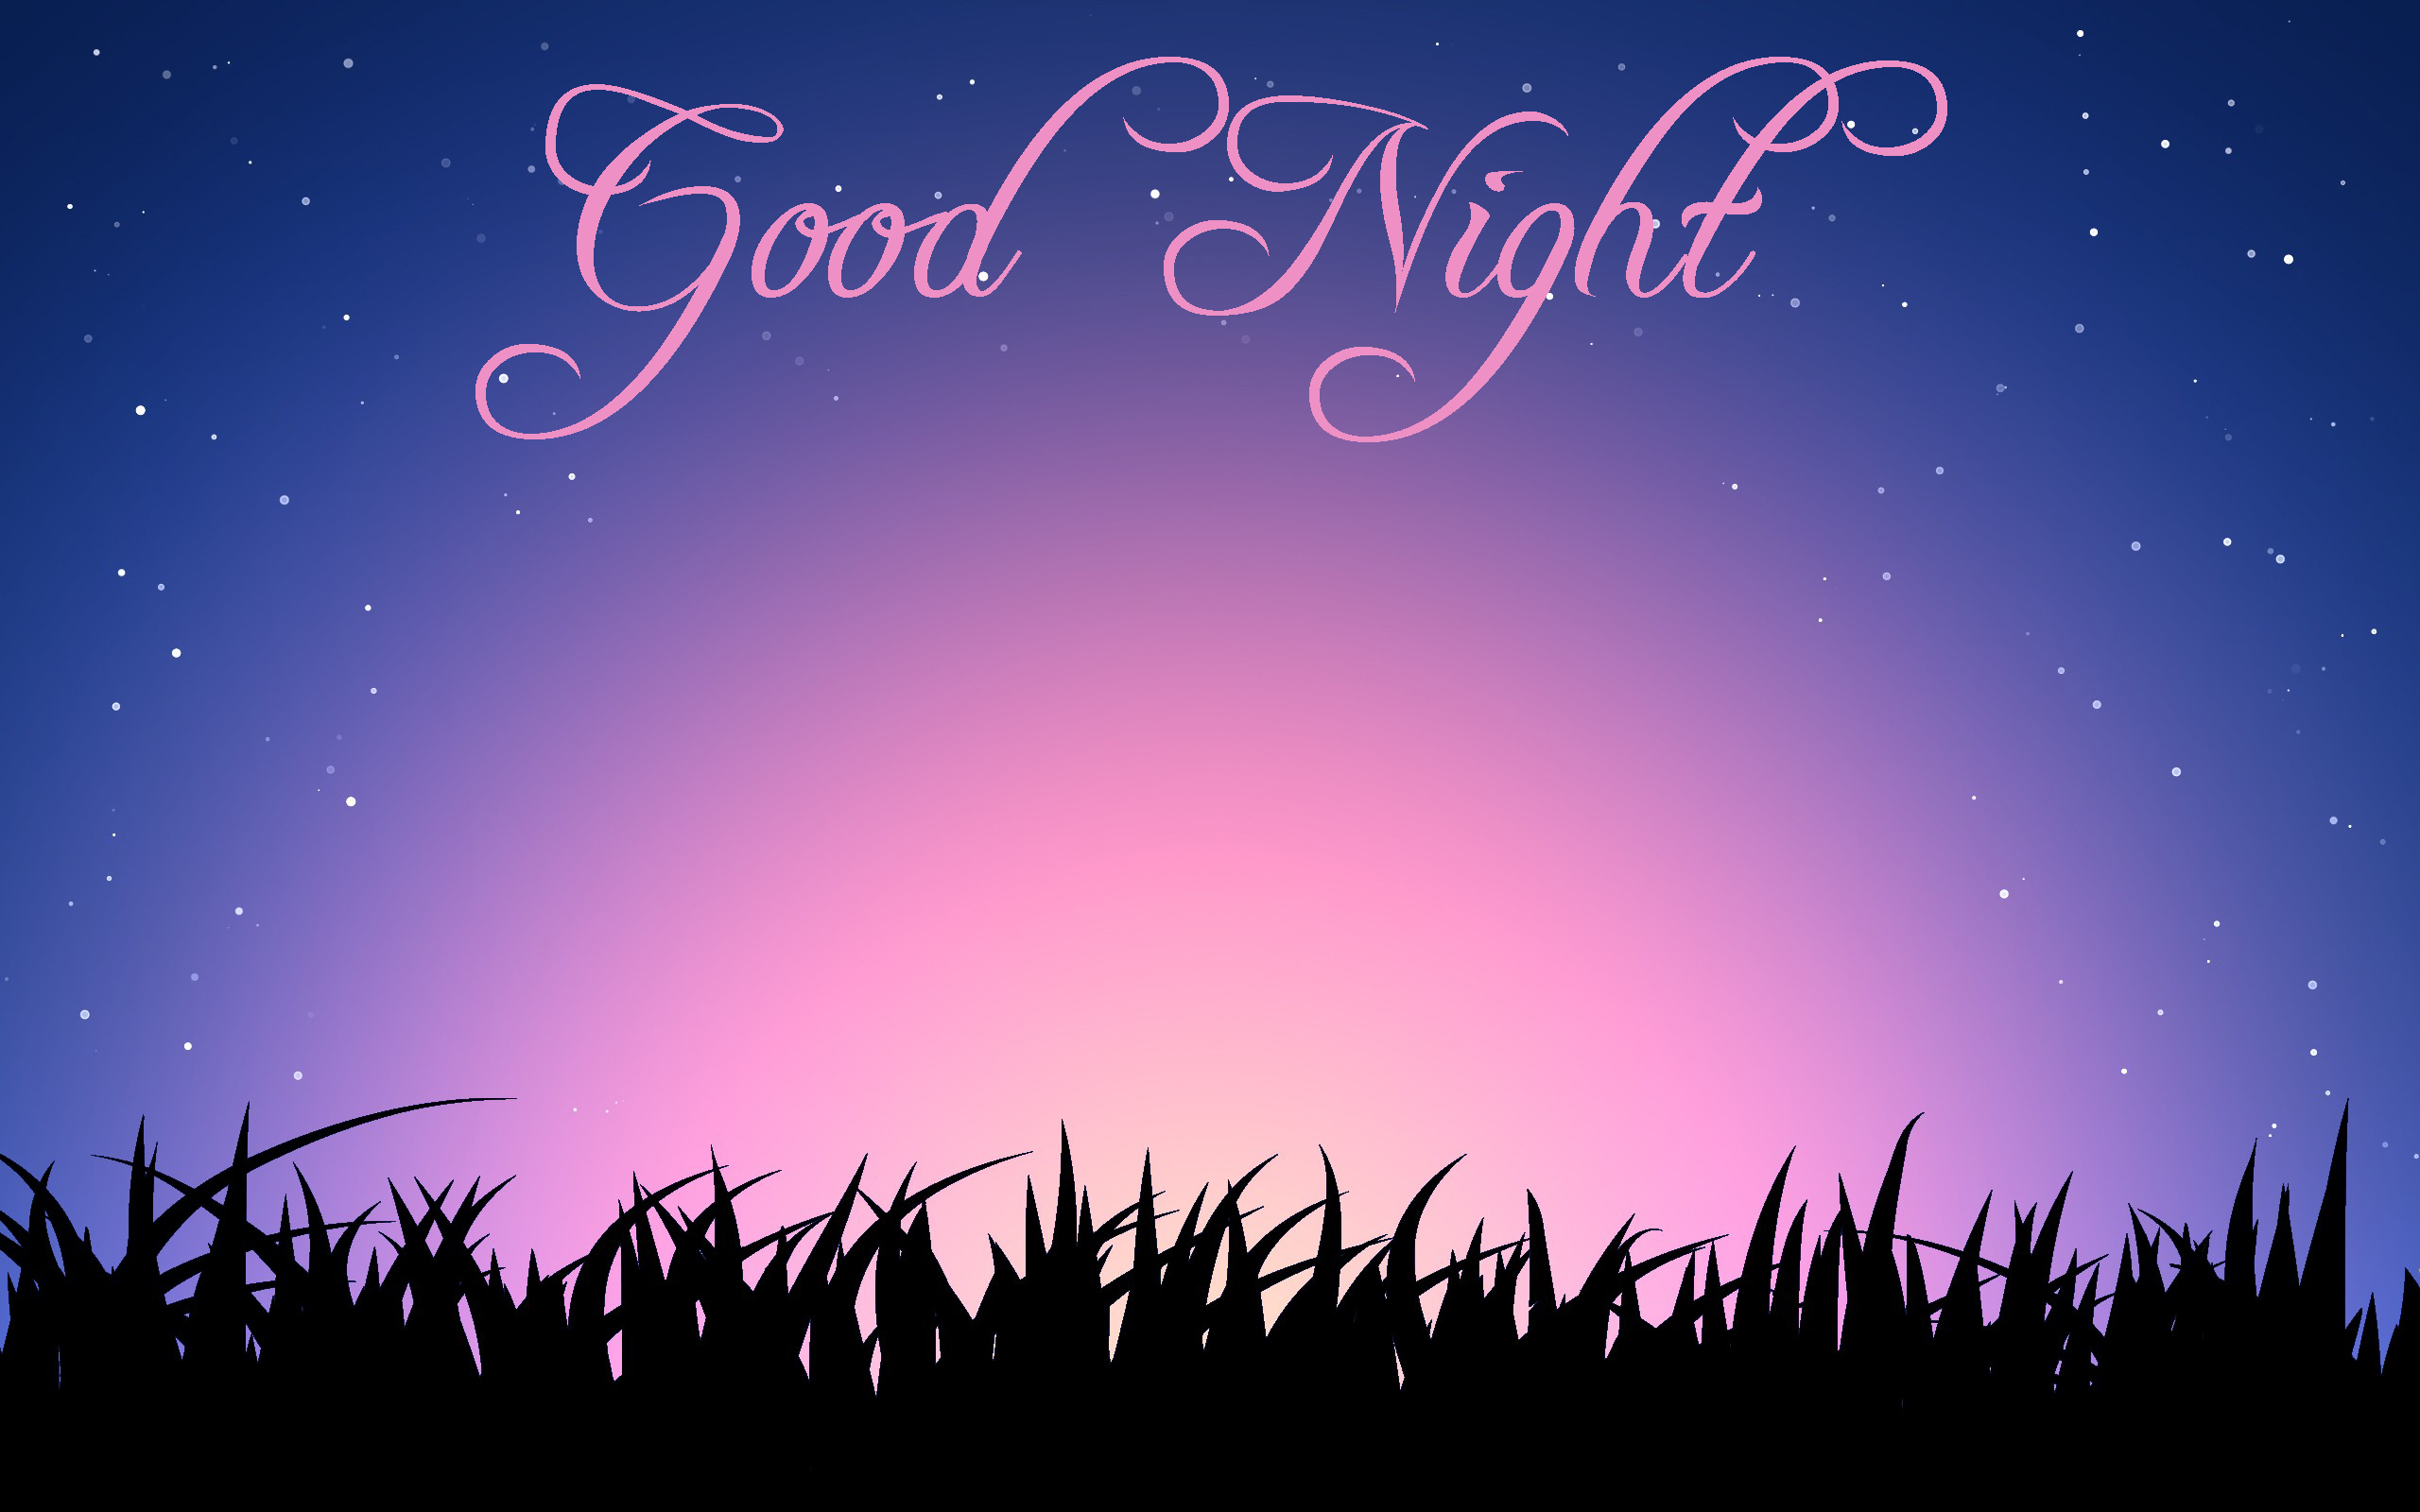 Good-Night-Cards-For-Android-Cell-Phones.jpg